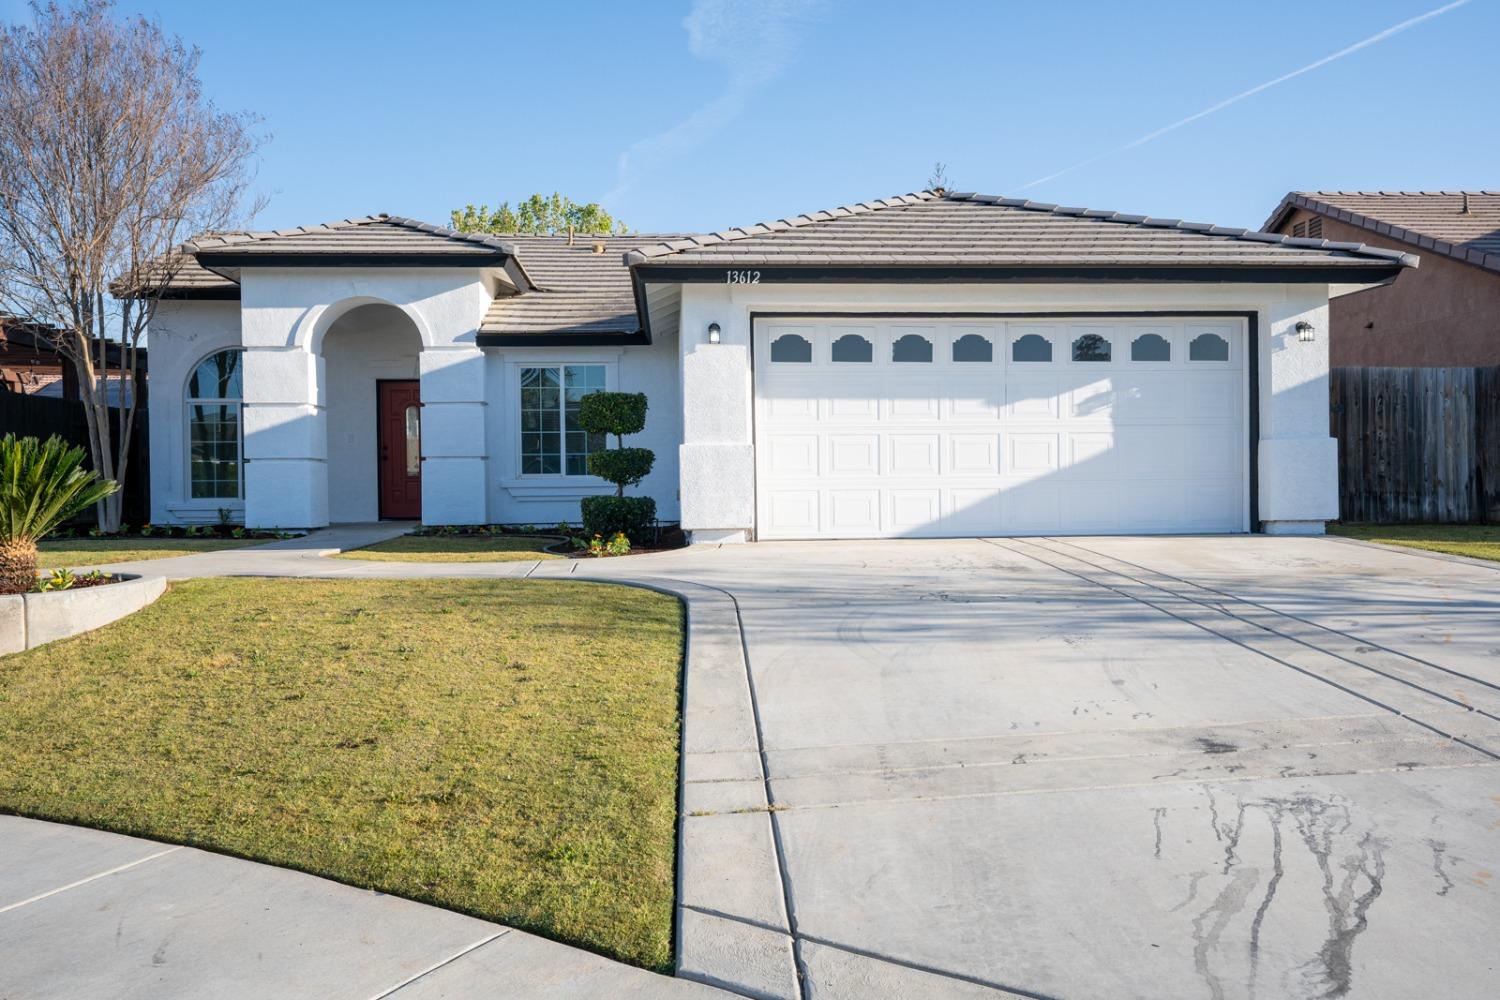 Photo of 13612 Dromore in Bakersfield, CA